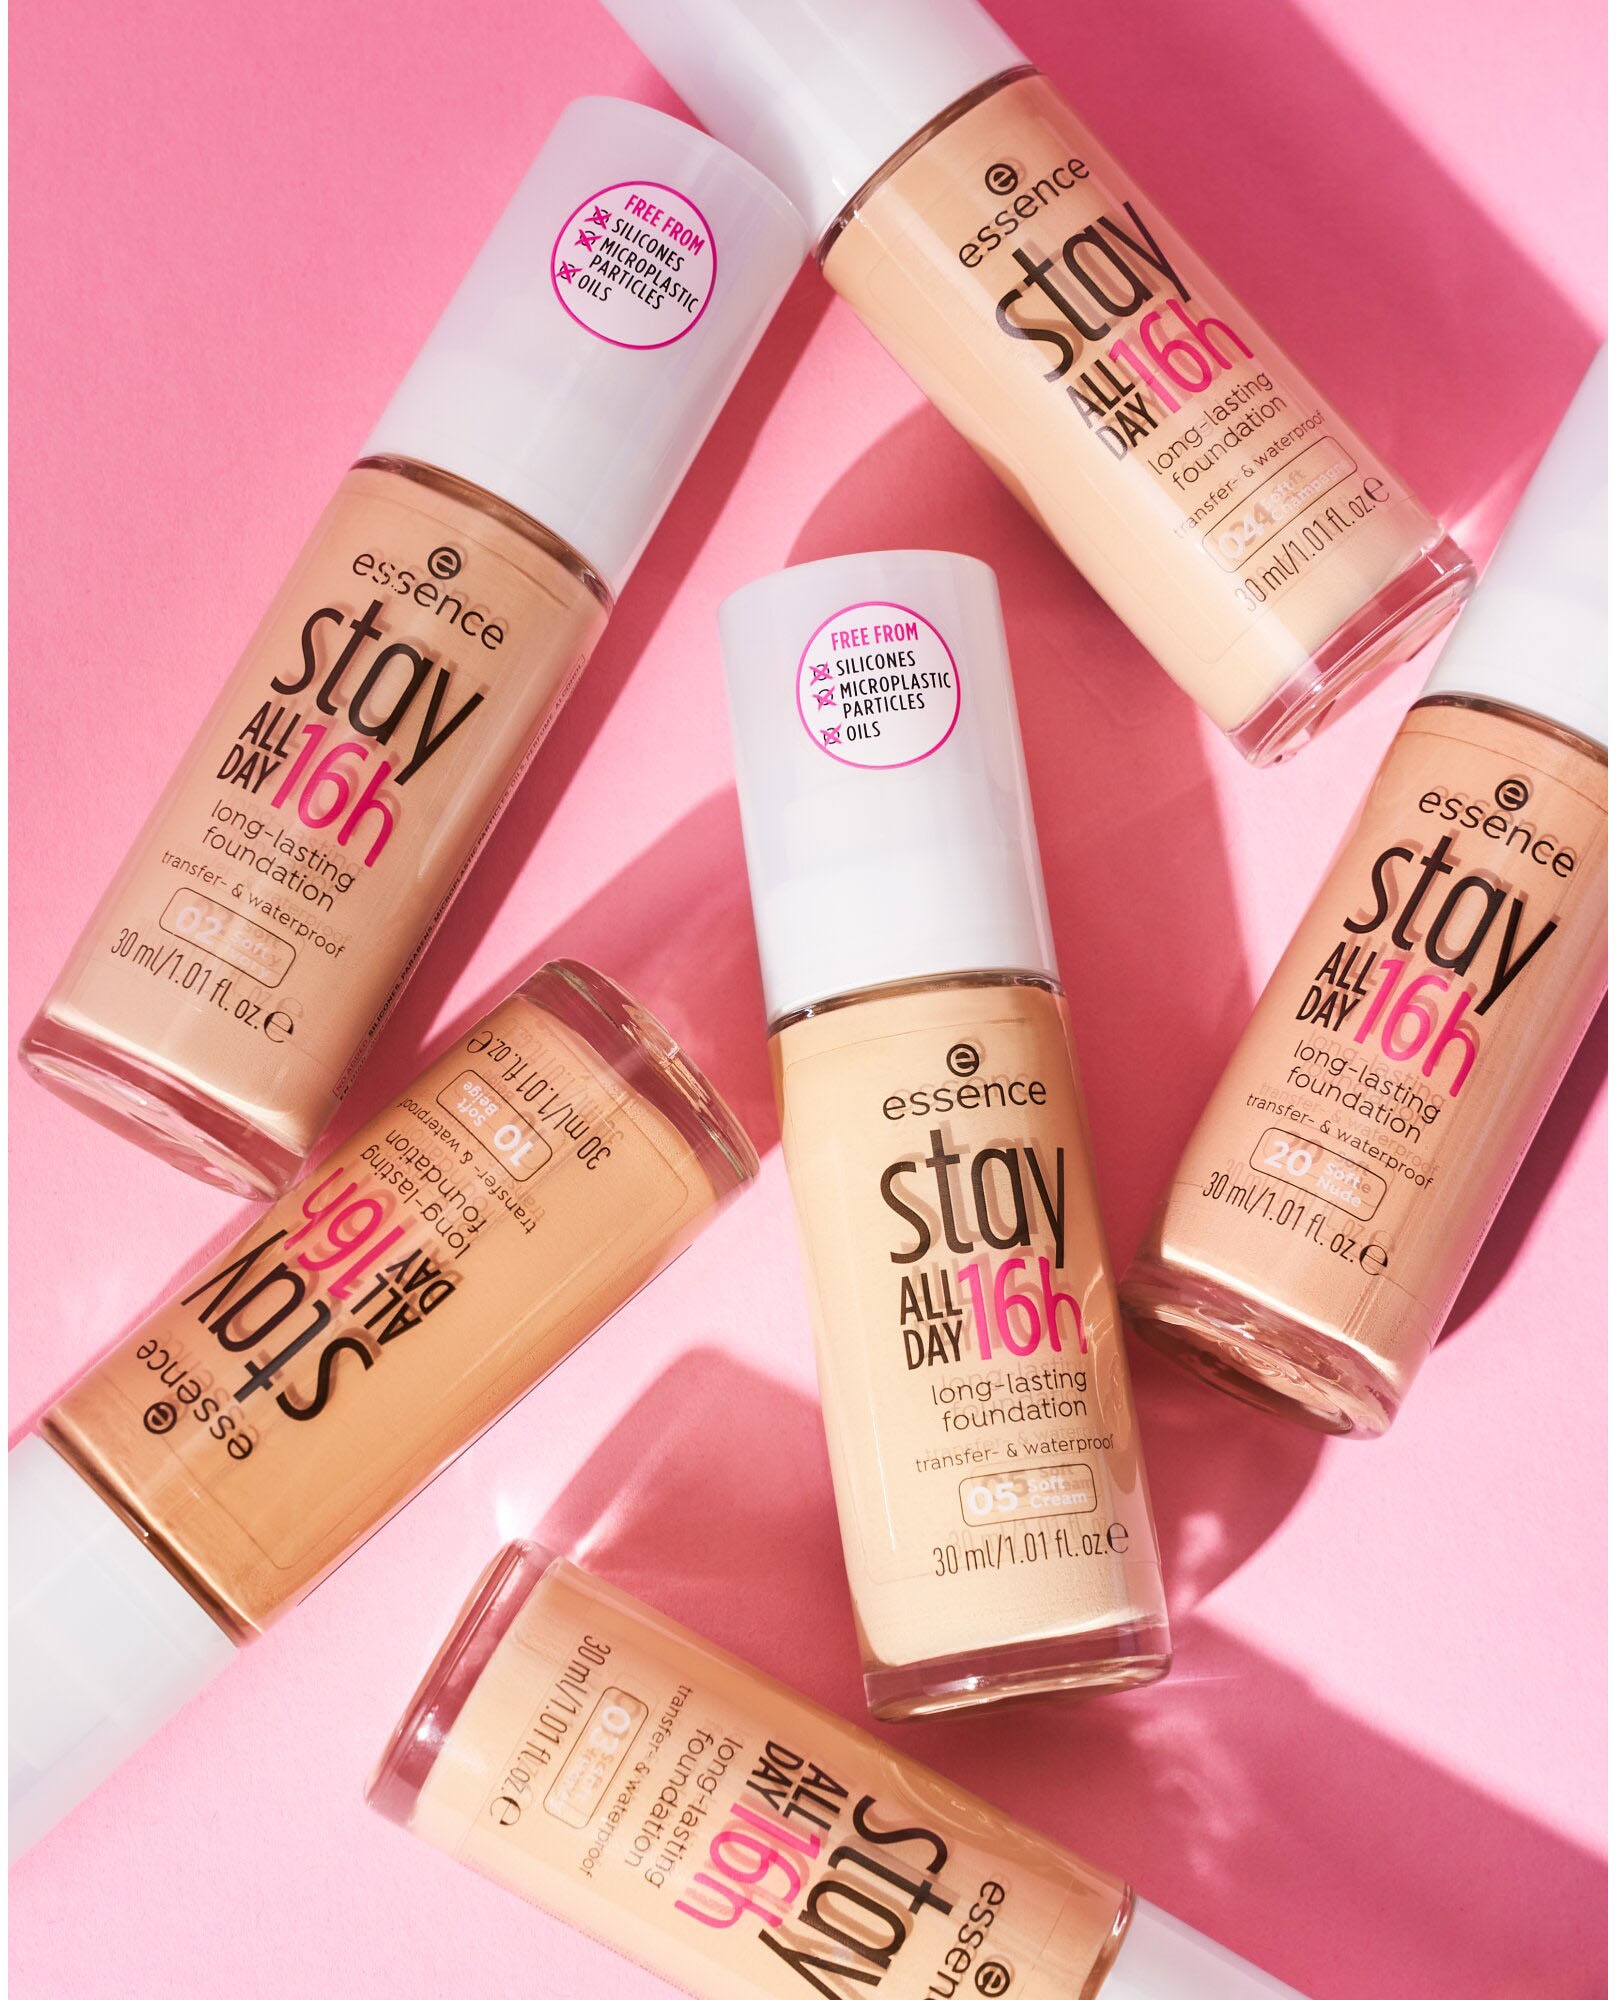 ♕ 3 Foundation long-lasting«, DAY »stay tlg.) 16h bei ALL (Set, Essence